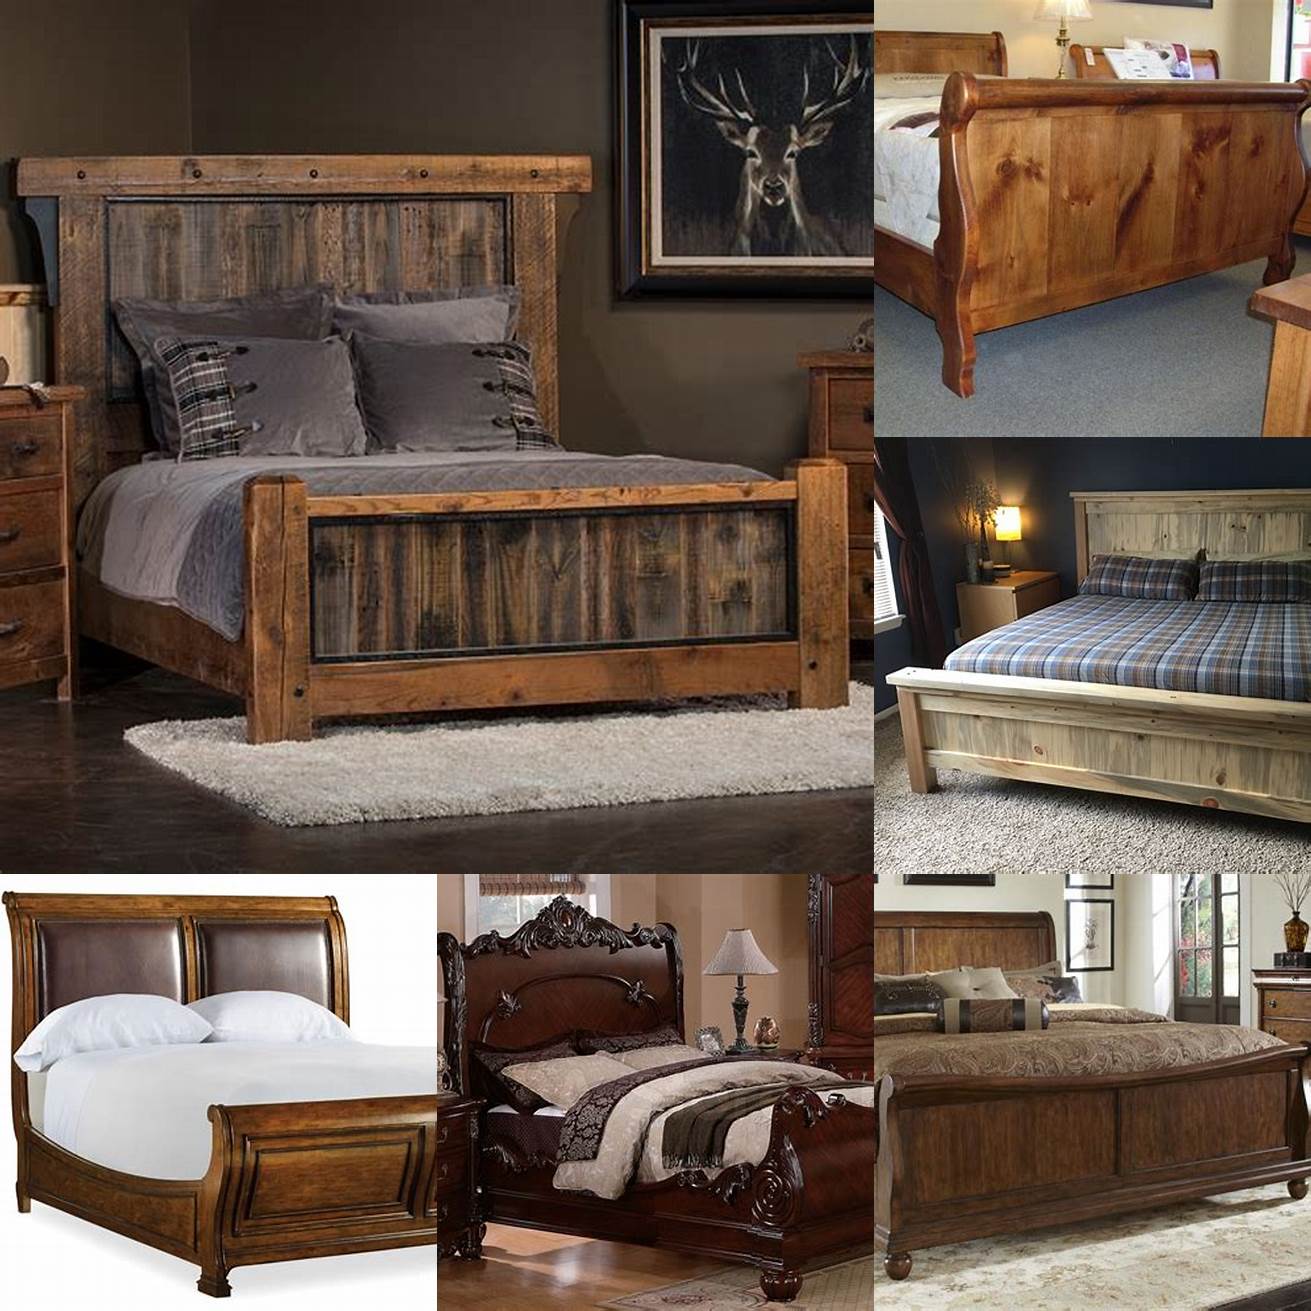 Image 3 A rustic King Sleigh Bed made of reclaimed wood